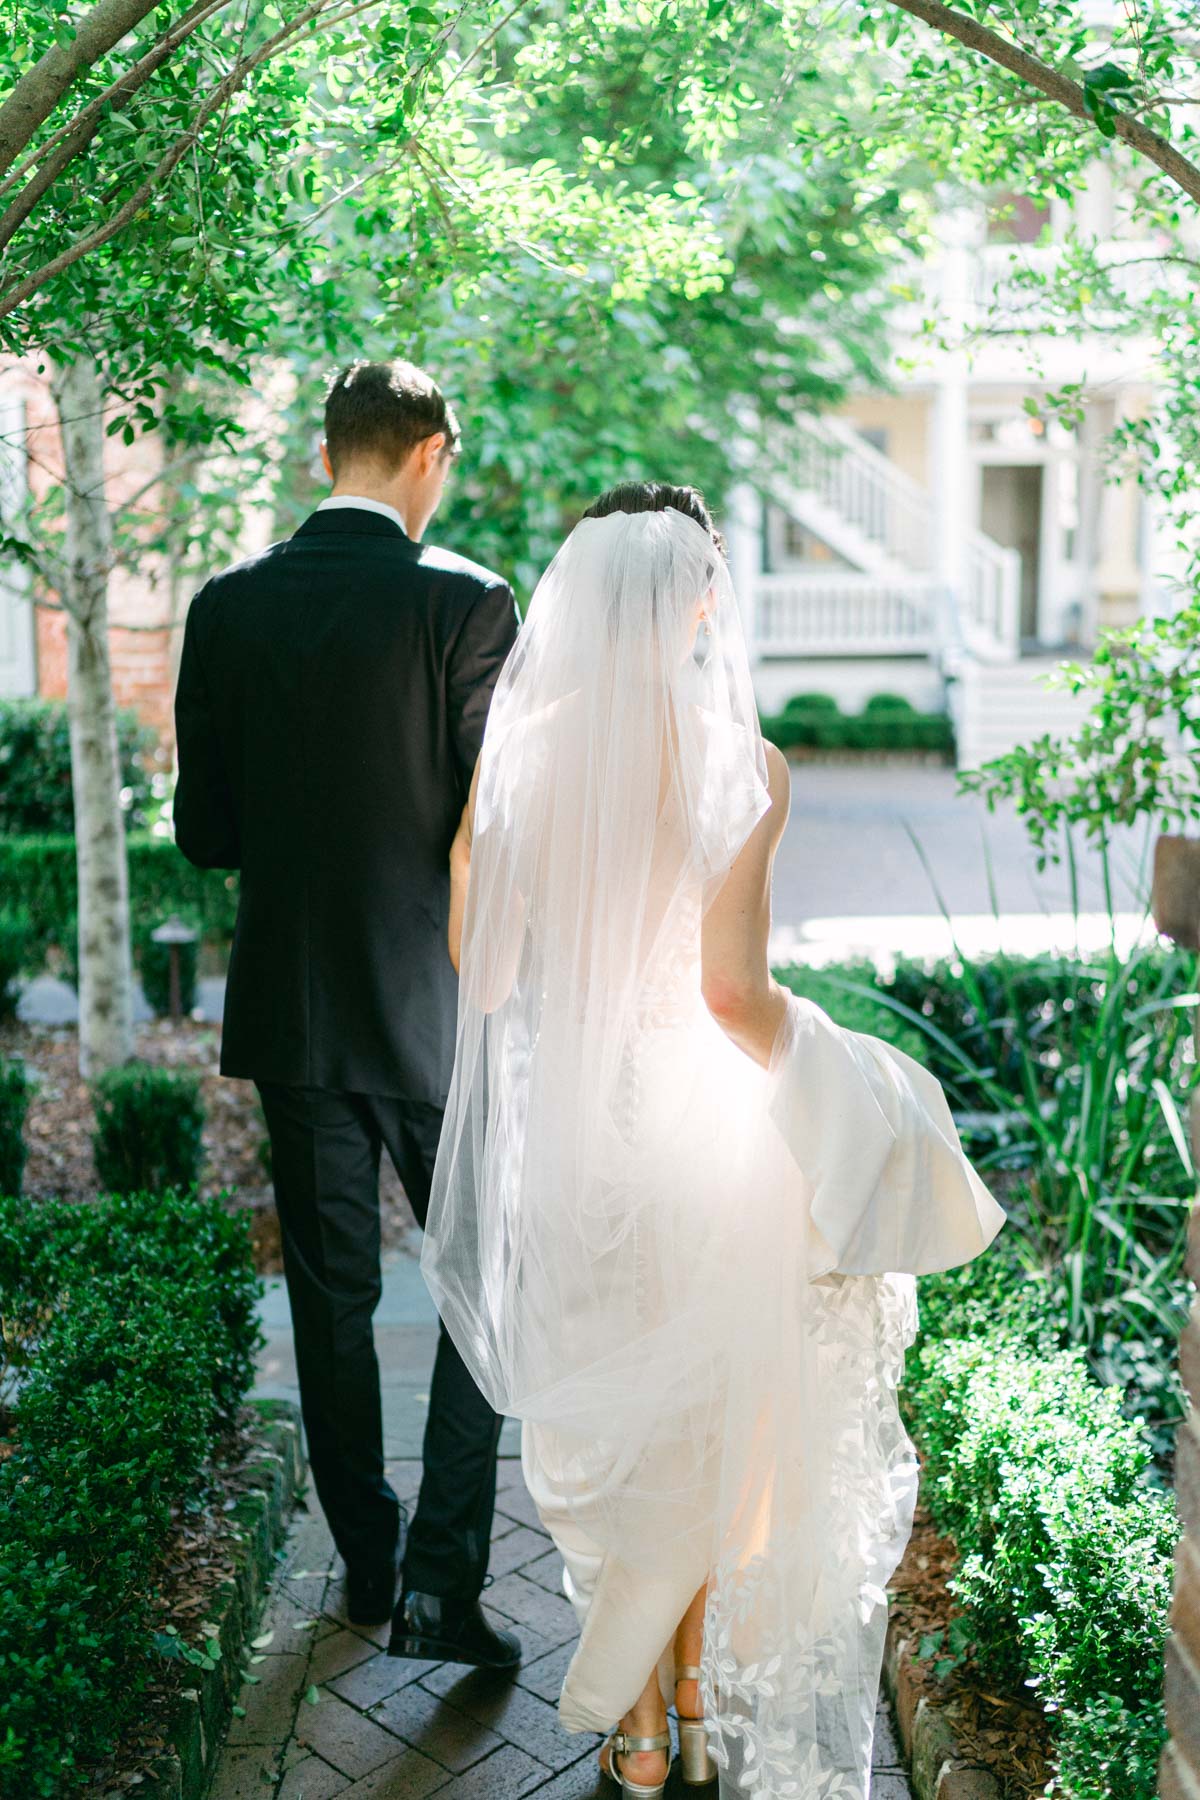 A bride and groom as they walk away into an intimate courtyard